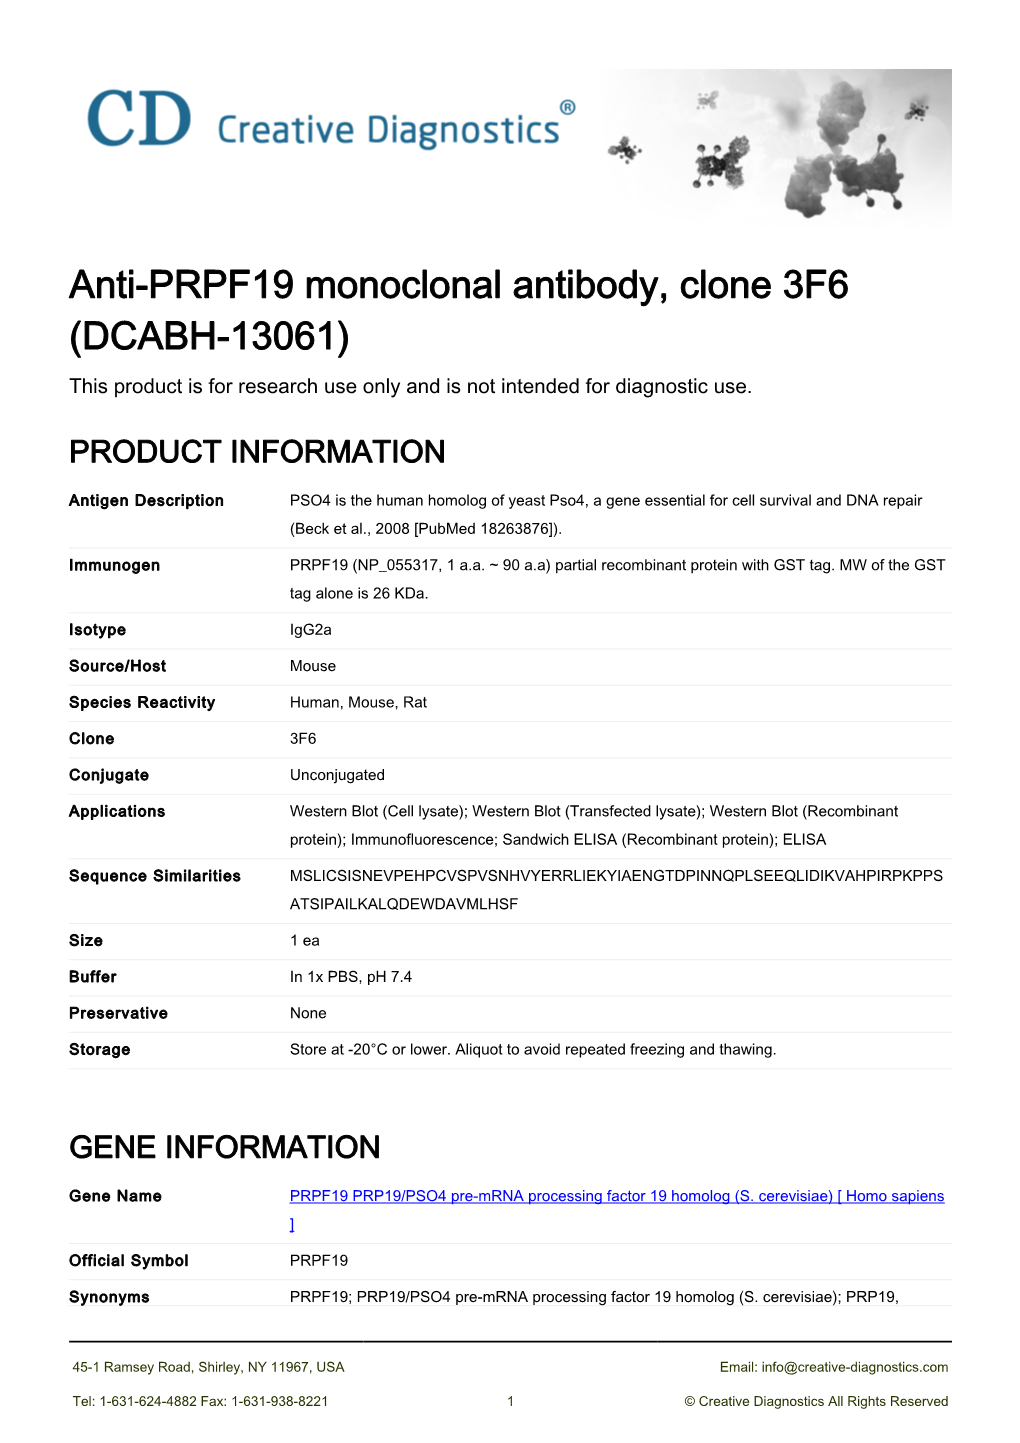 Anti-PRPF19 Monoclonal Antibody, Clone 3F6 (DCABH-13061) This Product Is for Research Use Only and Is Not Intended for Diagnostic Use